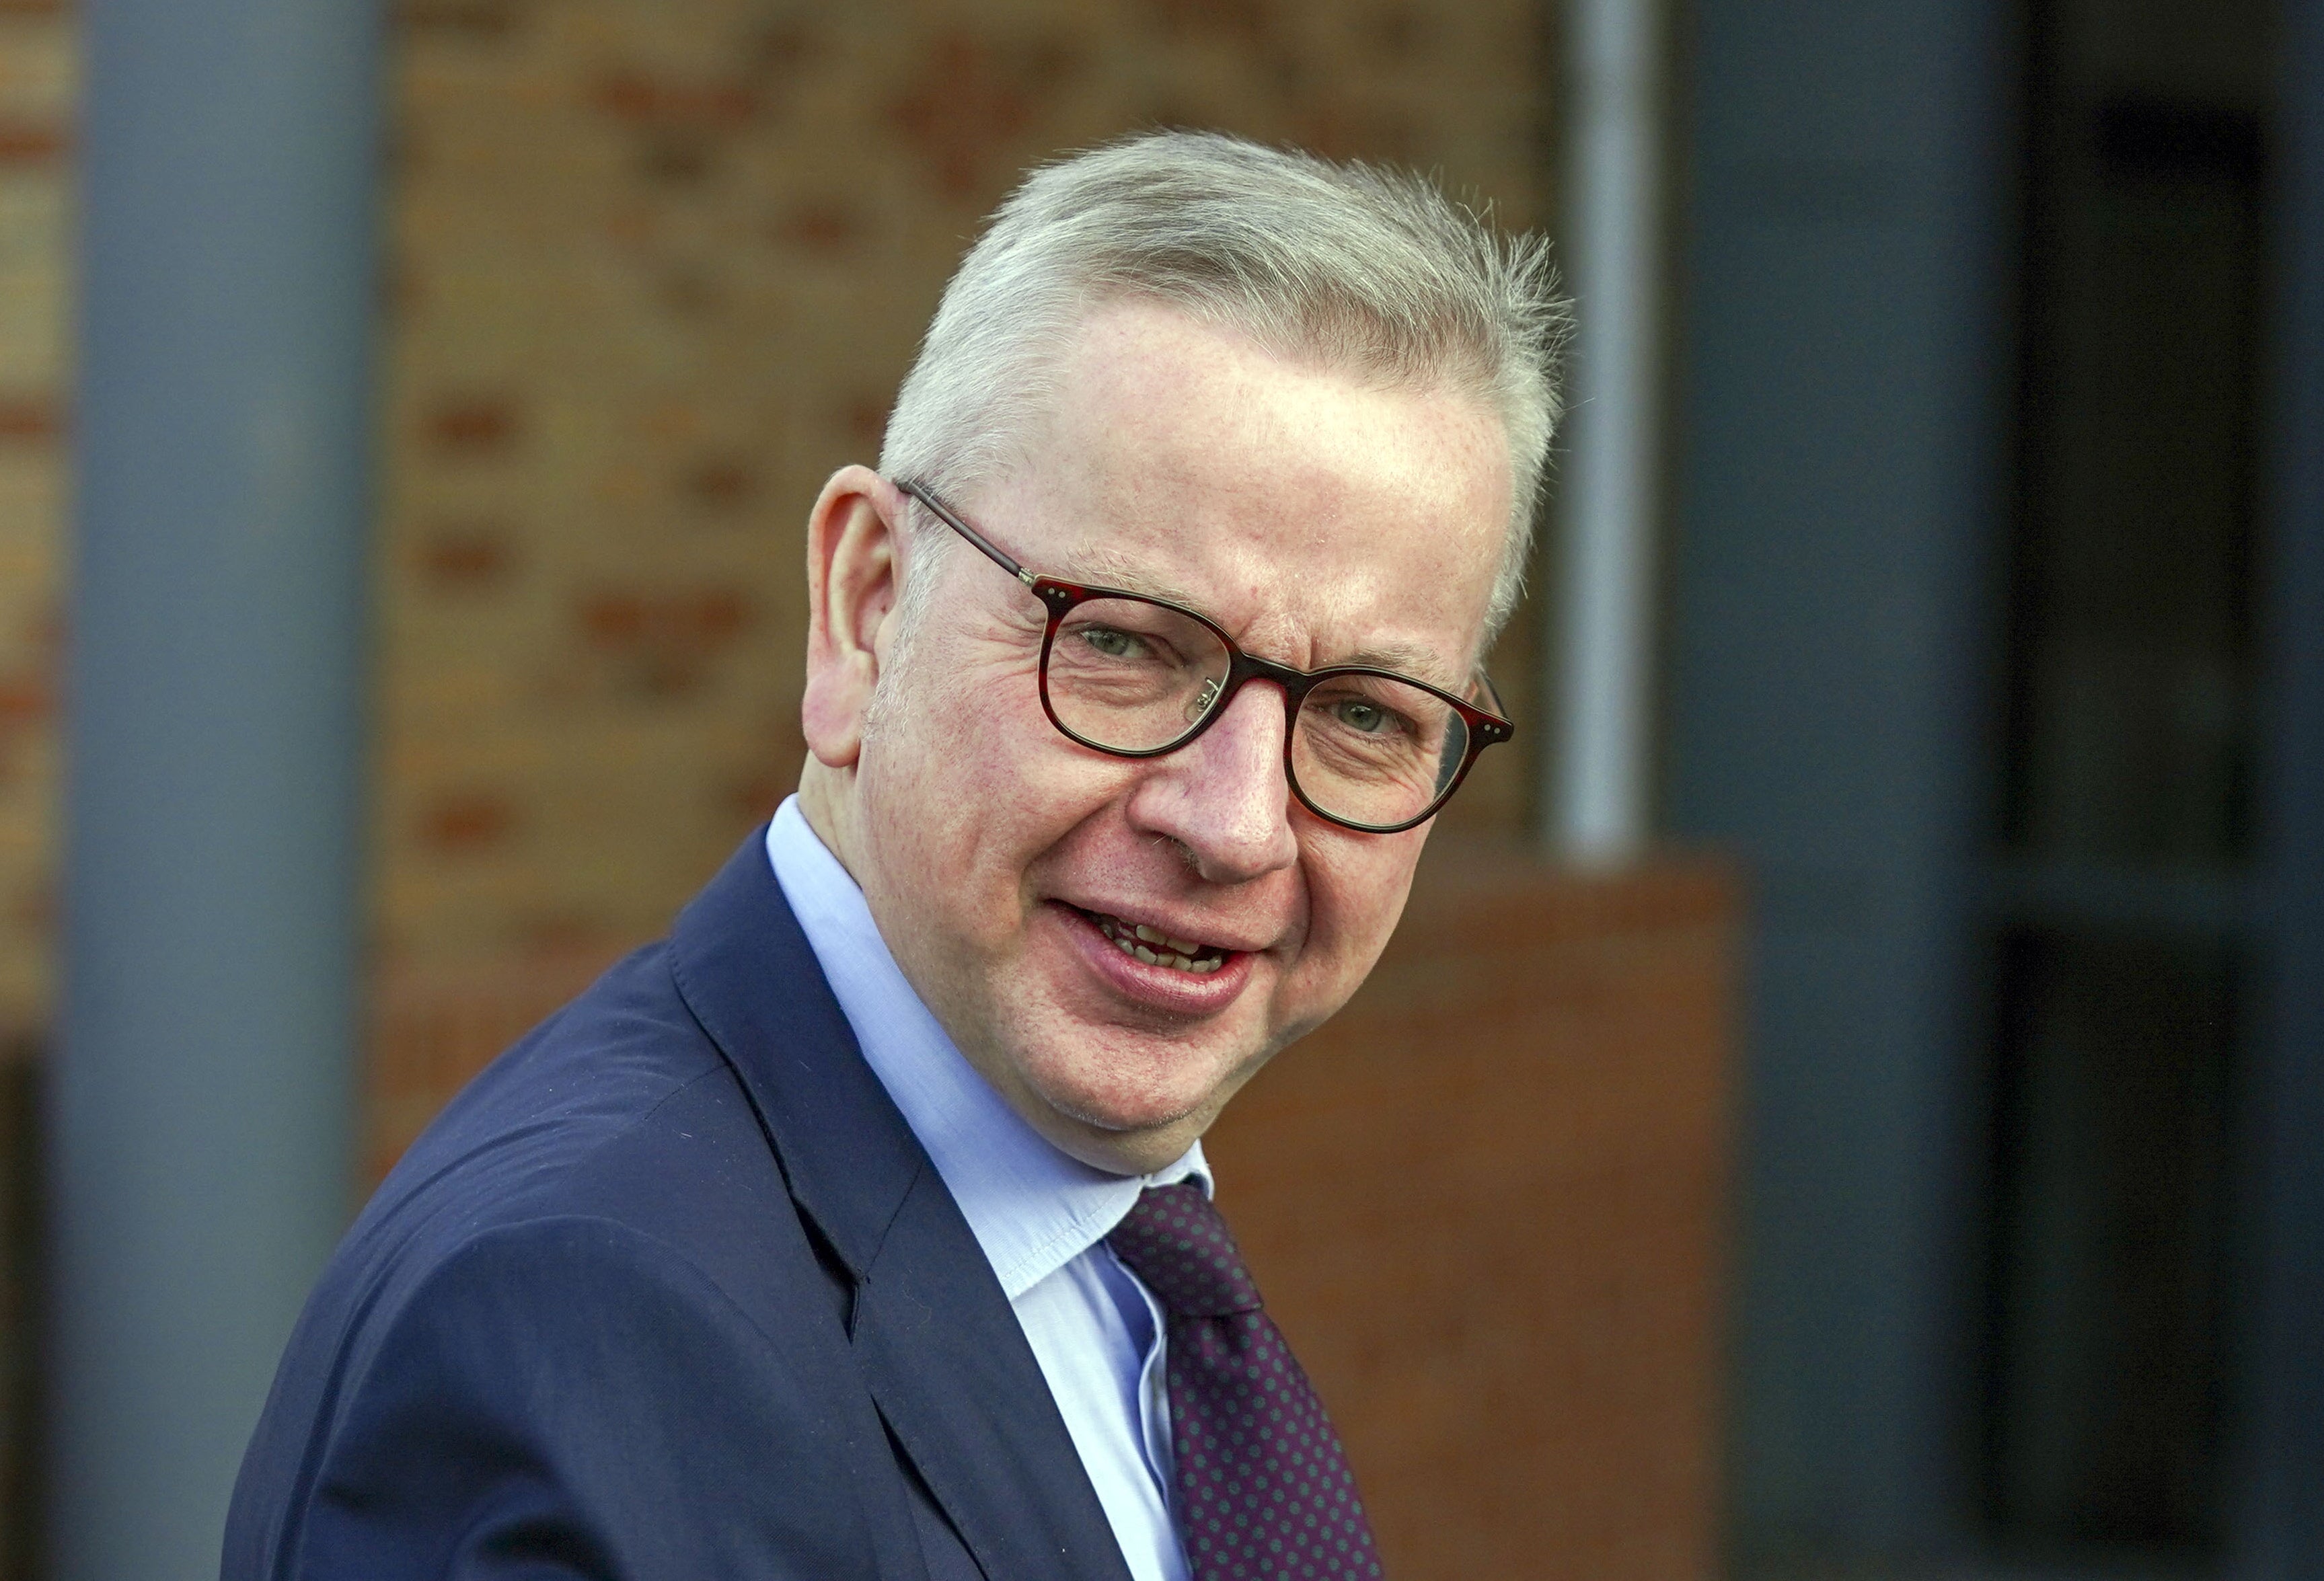 Gove dismissed suggestions that he is among cabinet members opposed to tearing up the Northern Ireland protocol